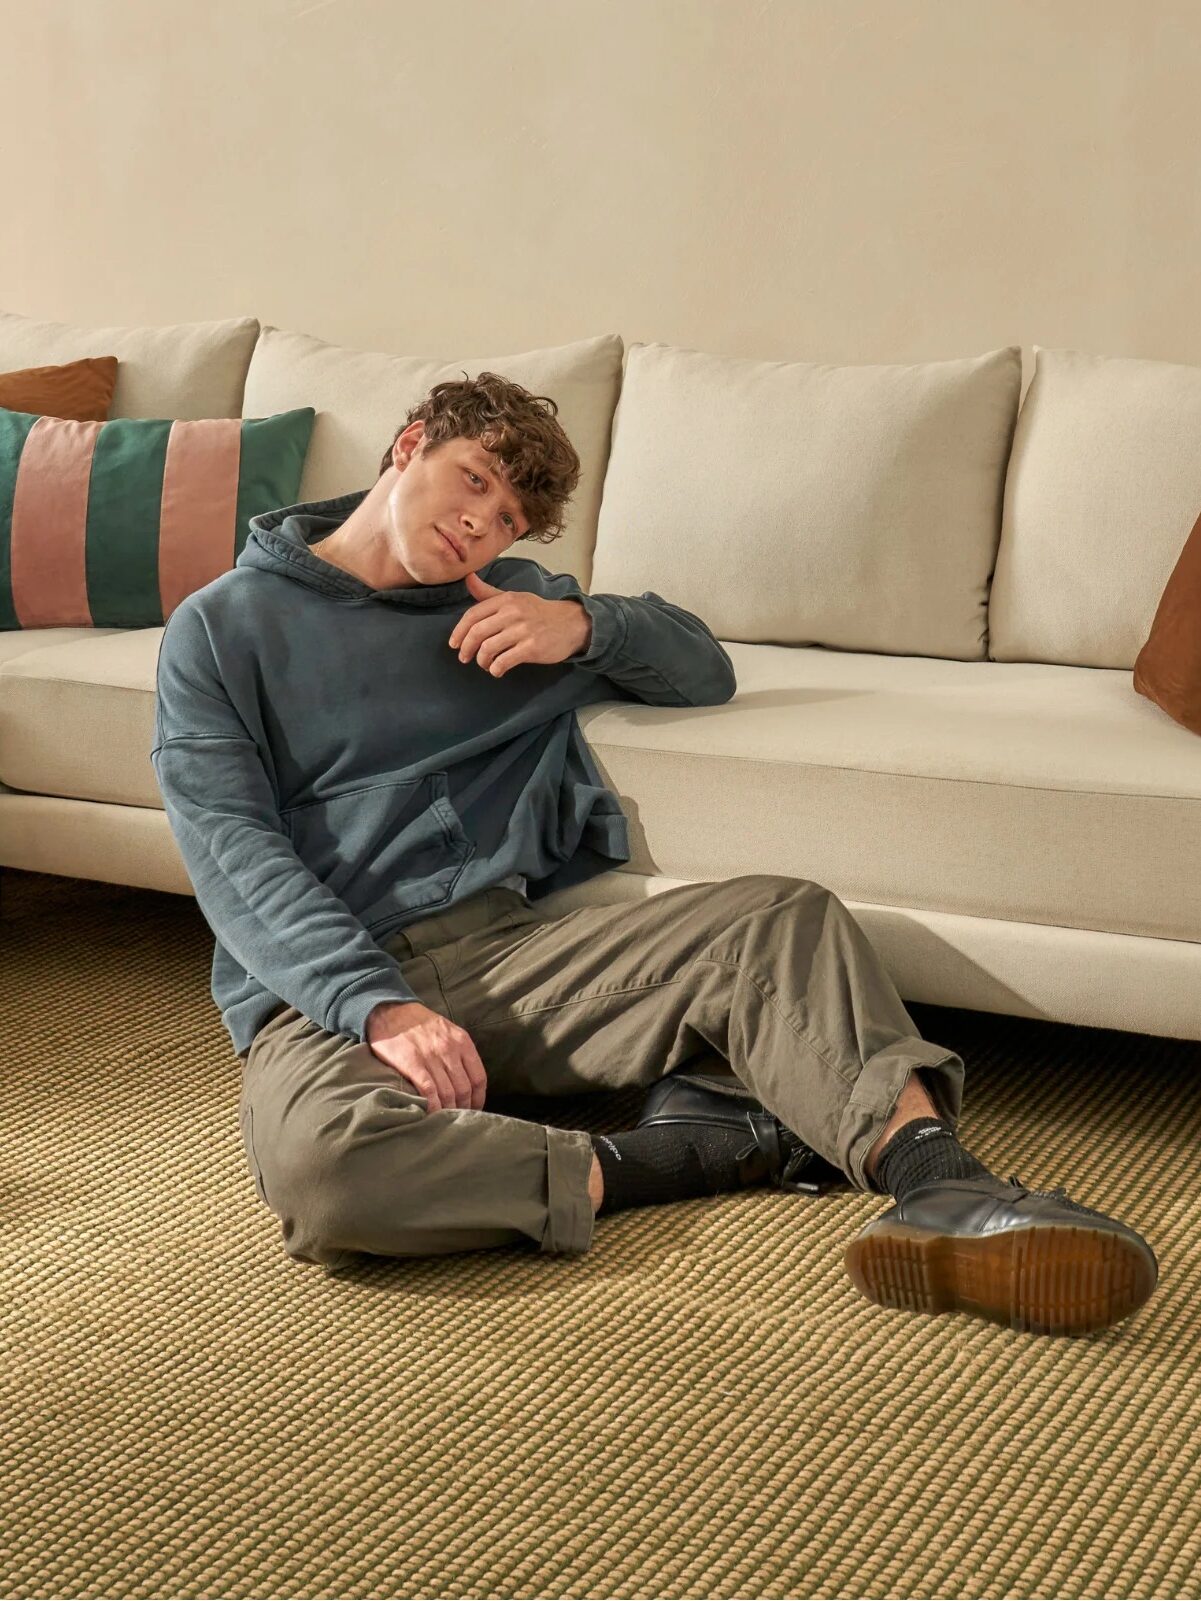 A person wearing a blue hoodie and khaki pants sits on the floor resting against a beige sofa in a living room with a beige rug, pillows, a side table with books, and a vase with flowers.